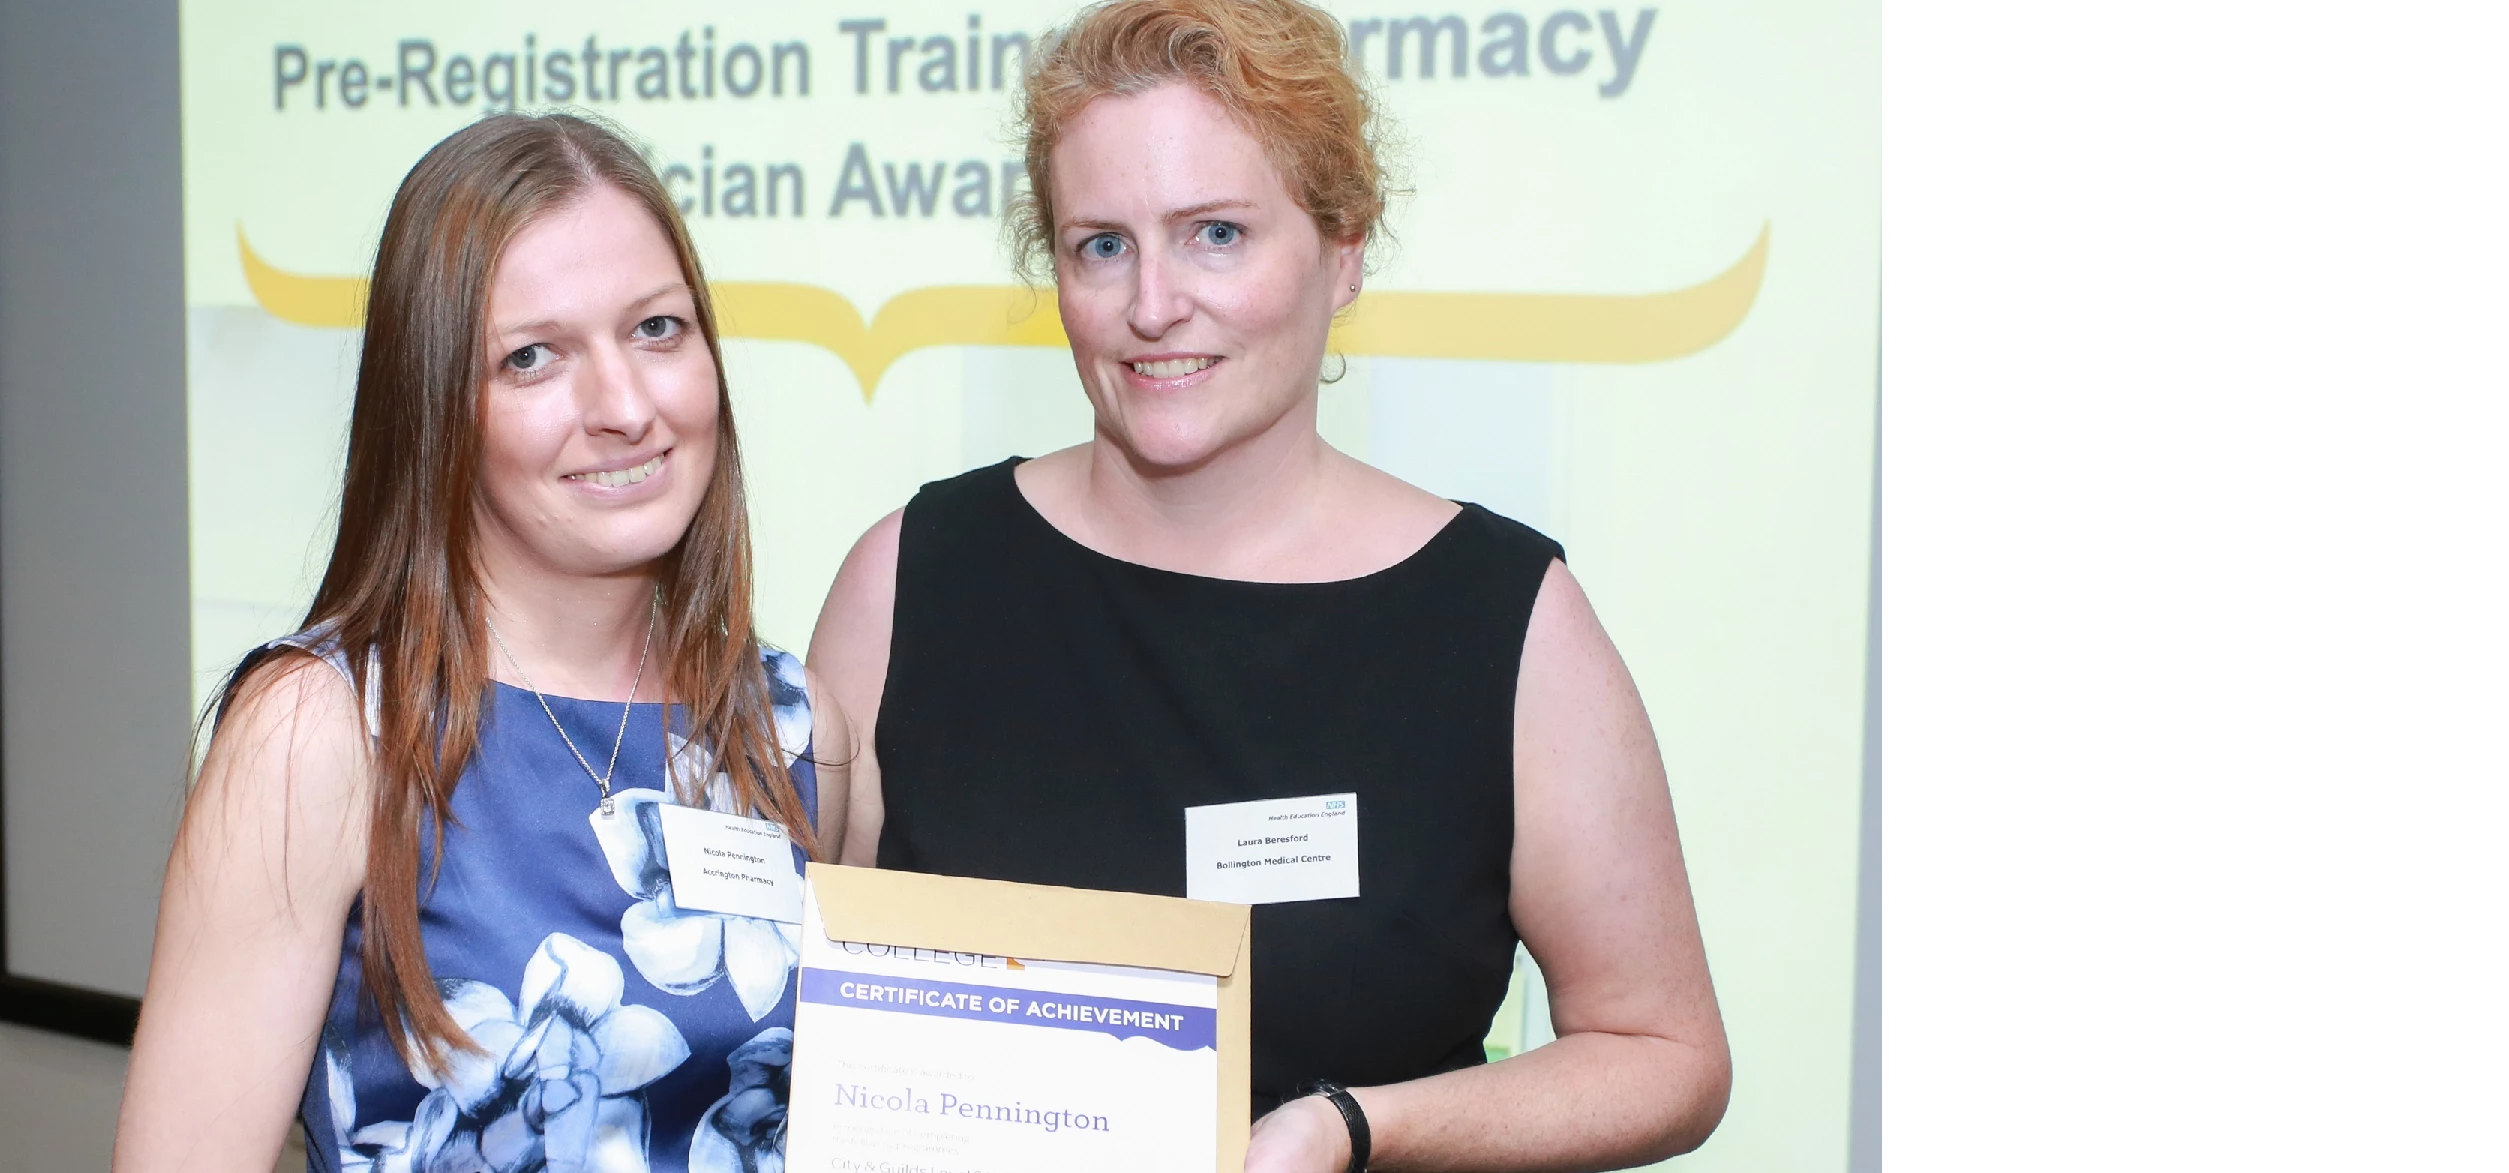 Nicola collecting her award with from Laura Beresford, systems & research manager at Bollington Heal